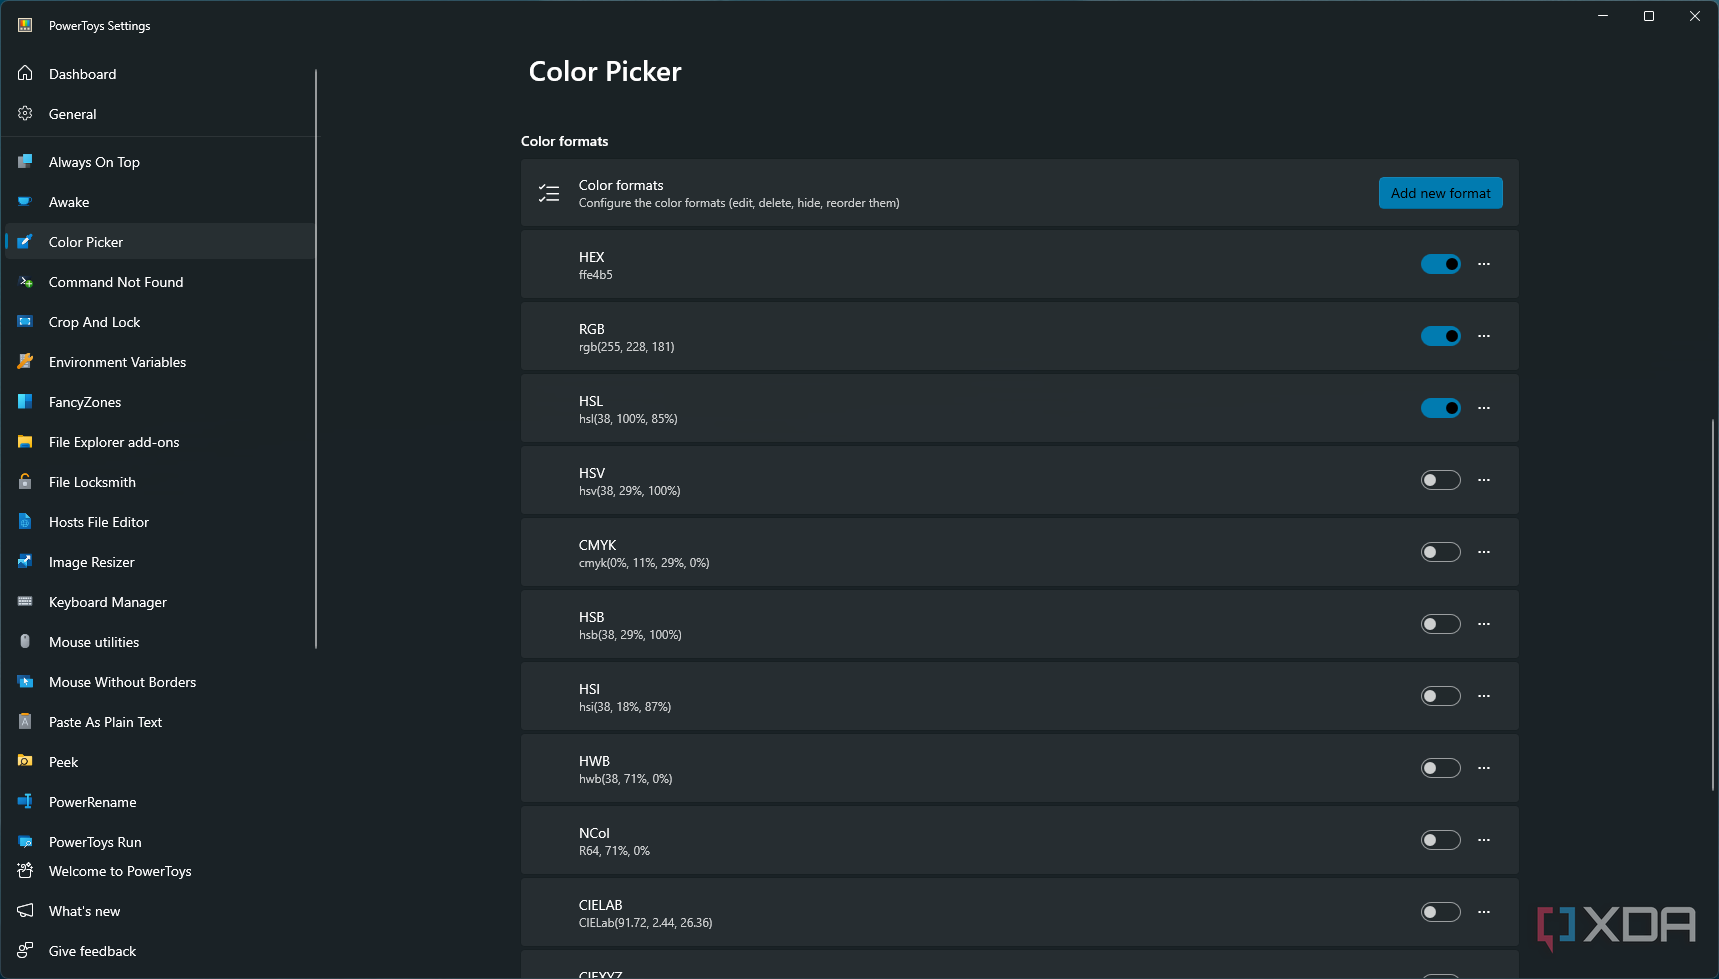 Screenshot of the color formats available for the color picker in PowerToys